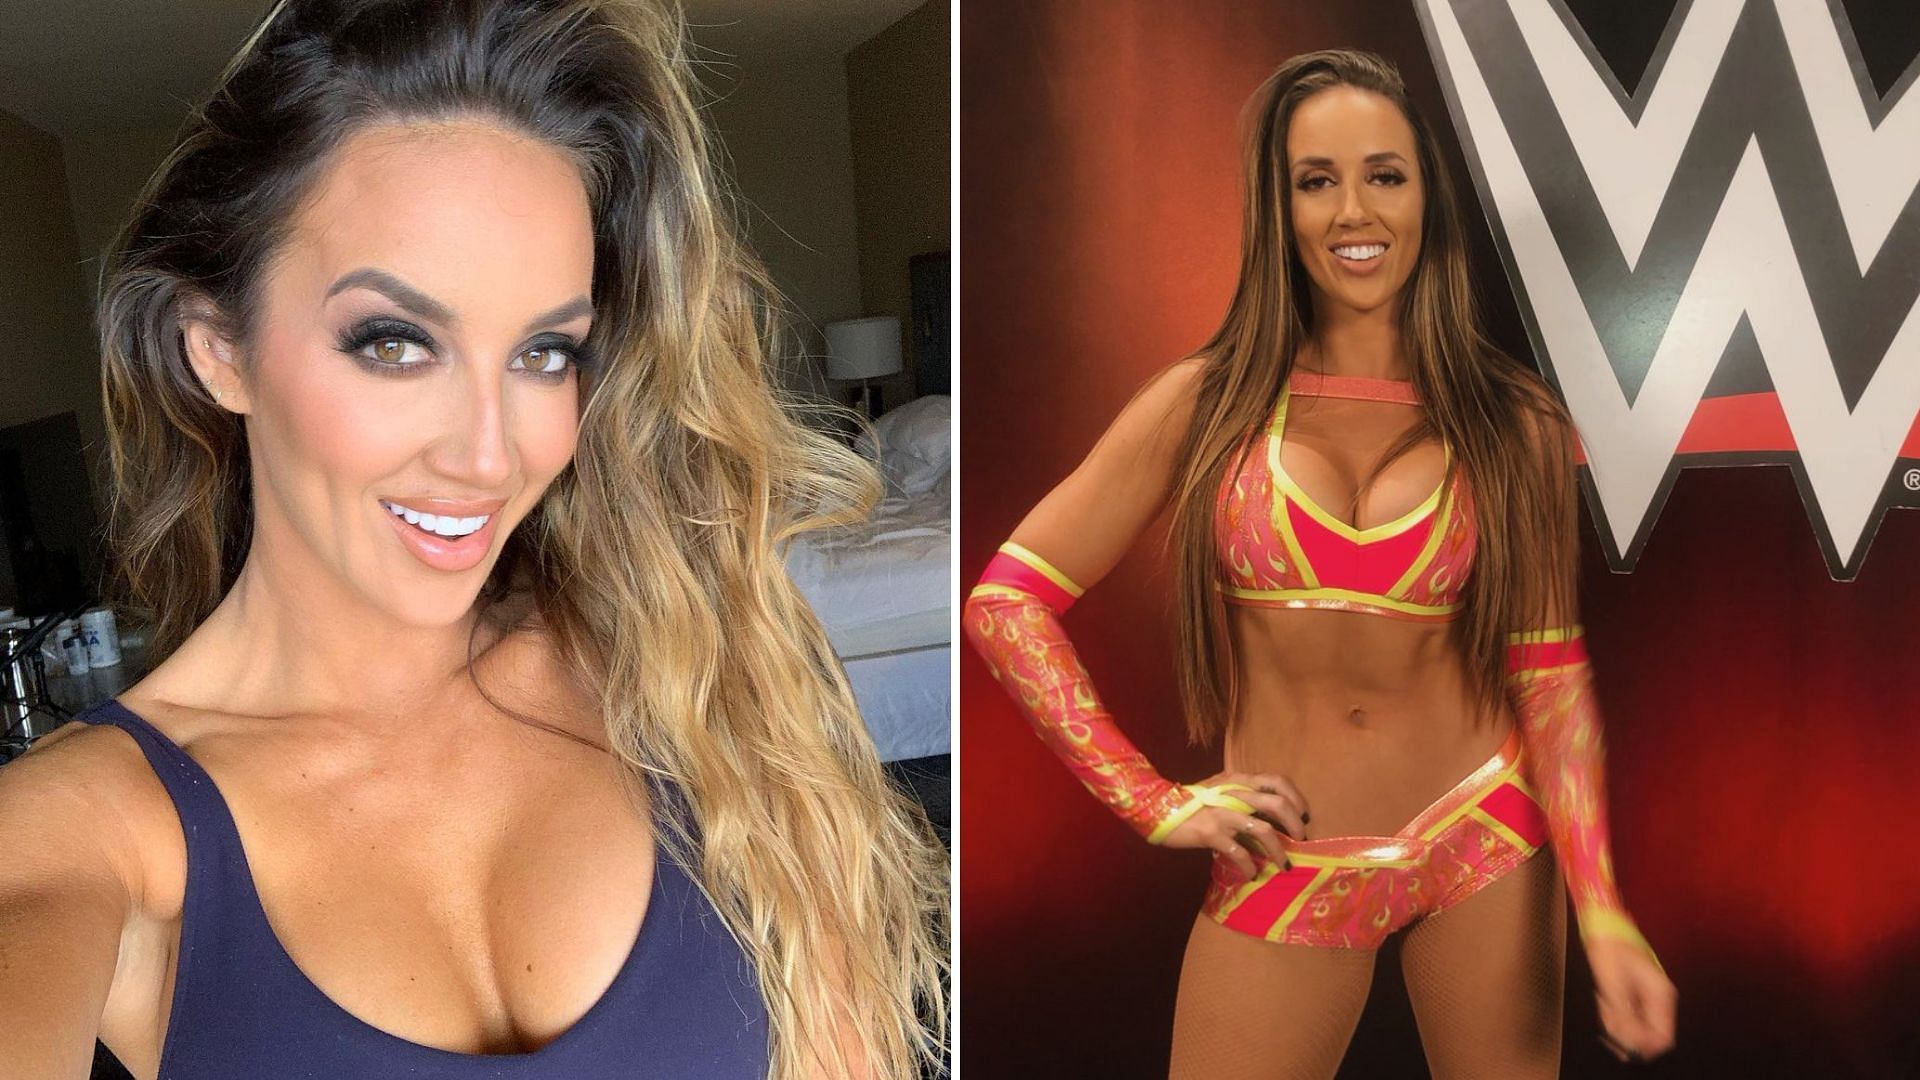 Chelsea Green spent several years in WWE before being released